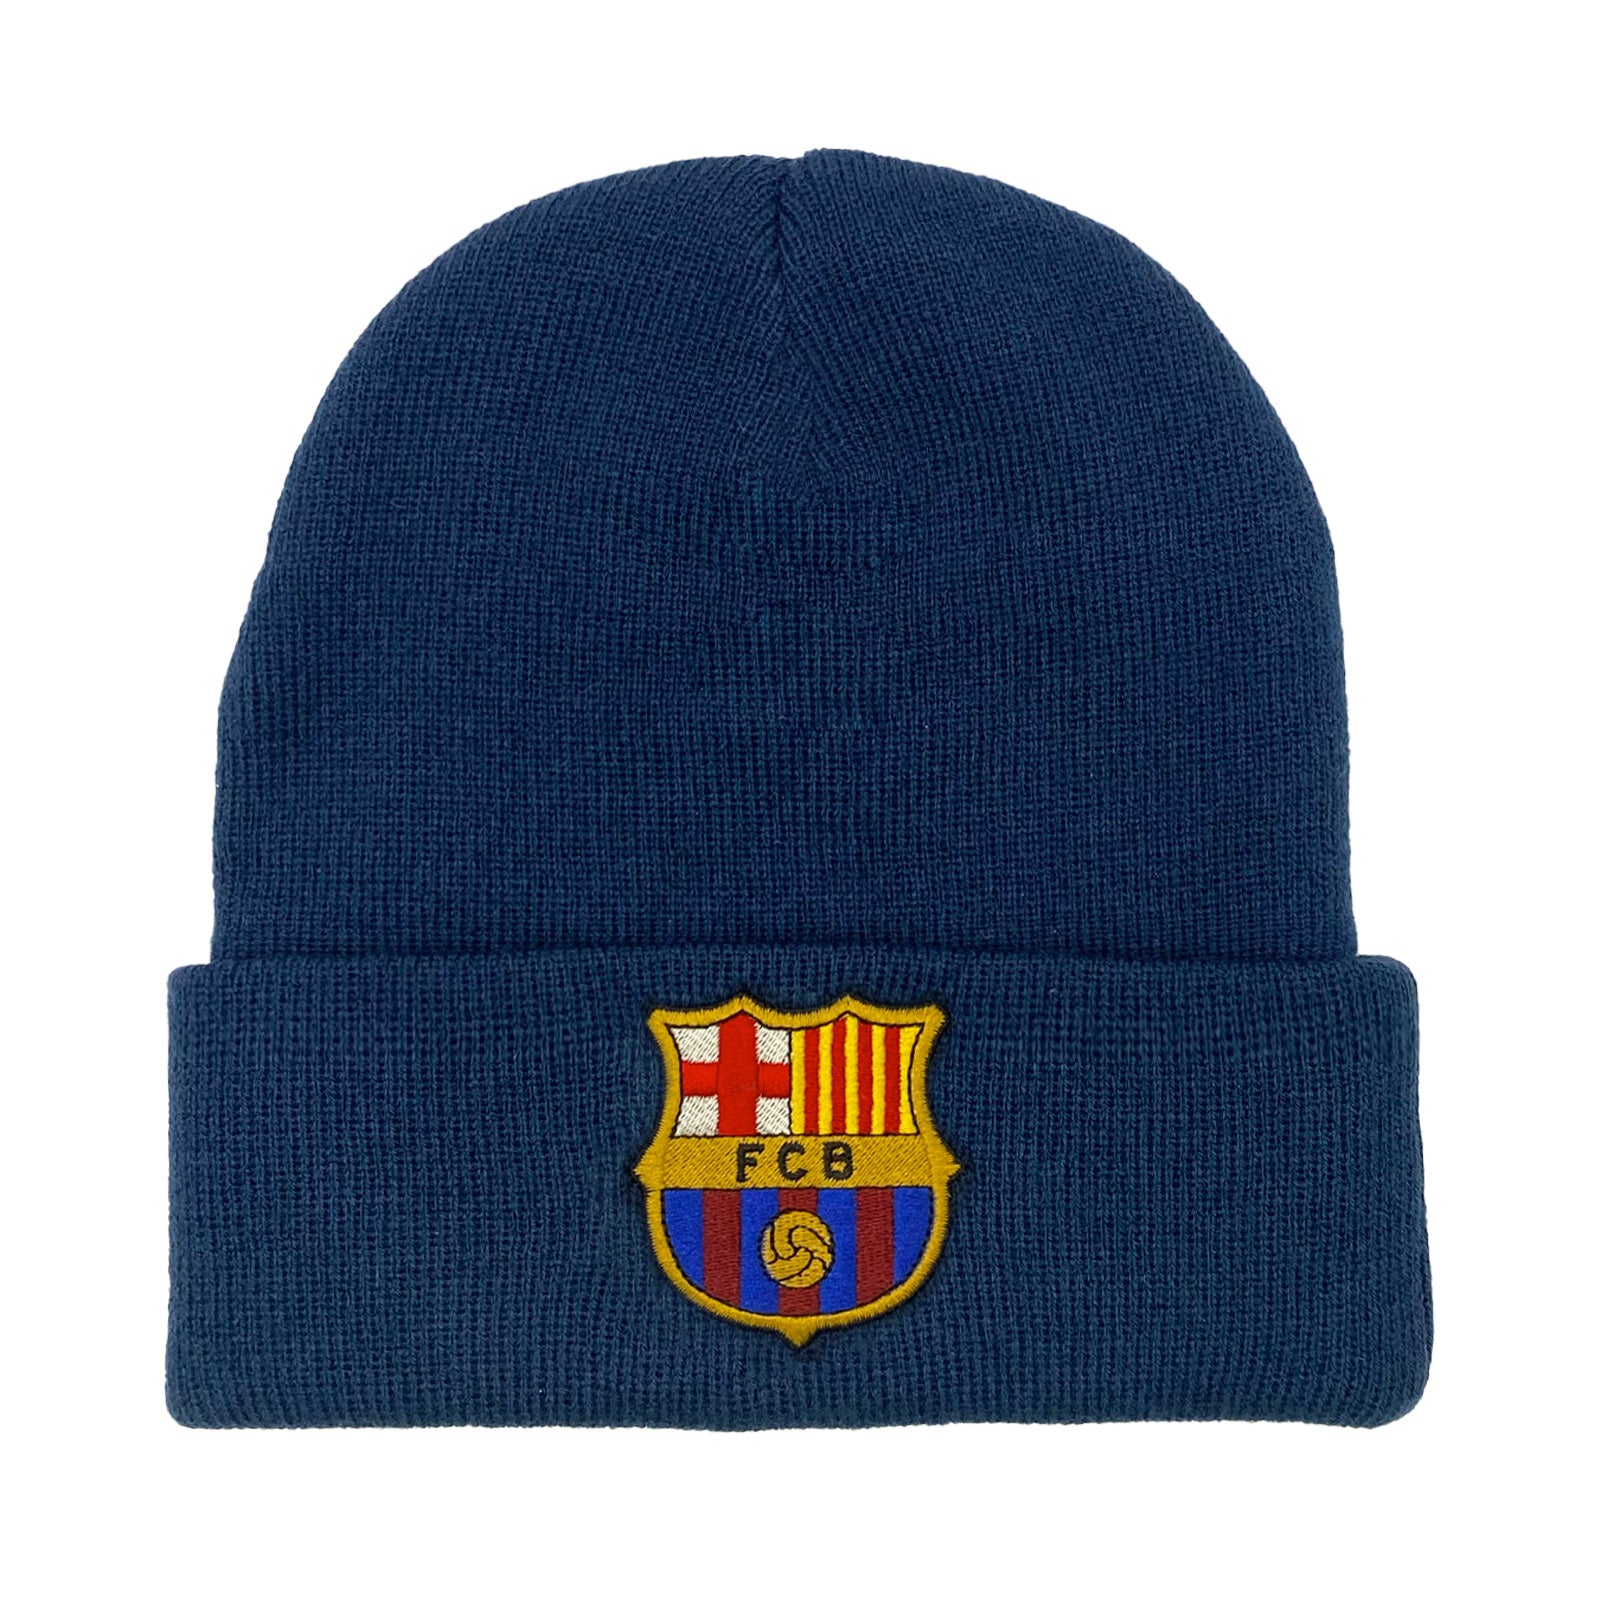 FC Barcelona Mens Knitted Hat